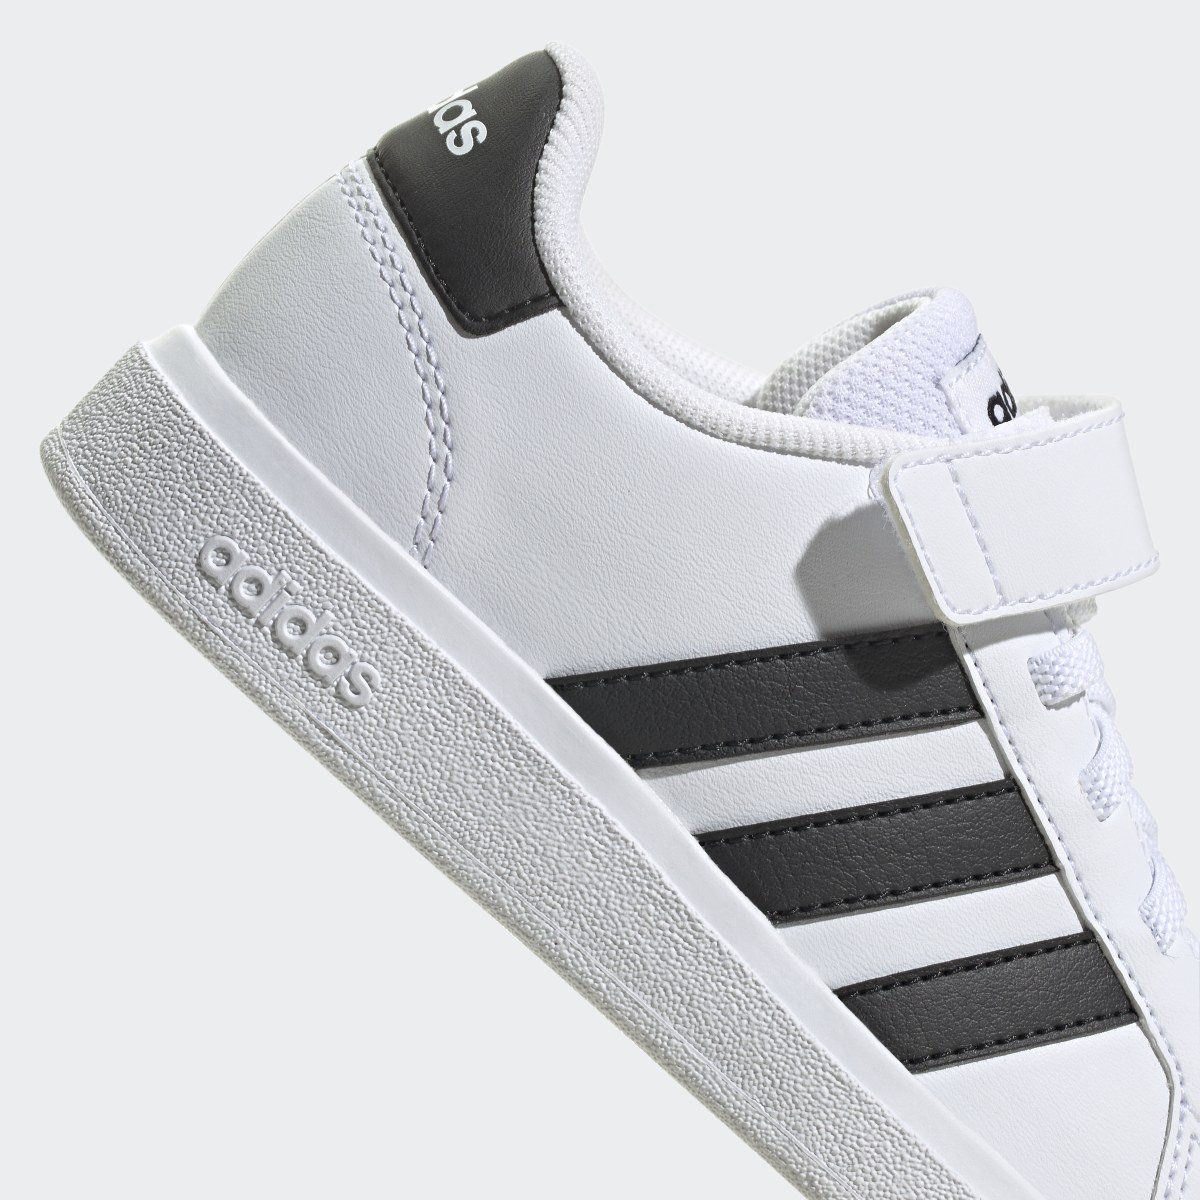 Adidas Grand Court Shoes. 10